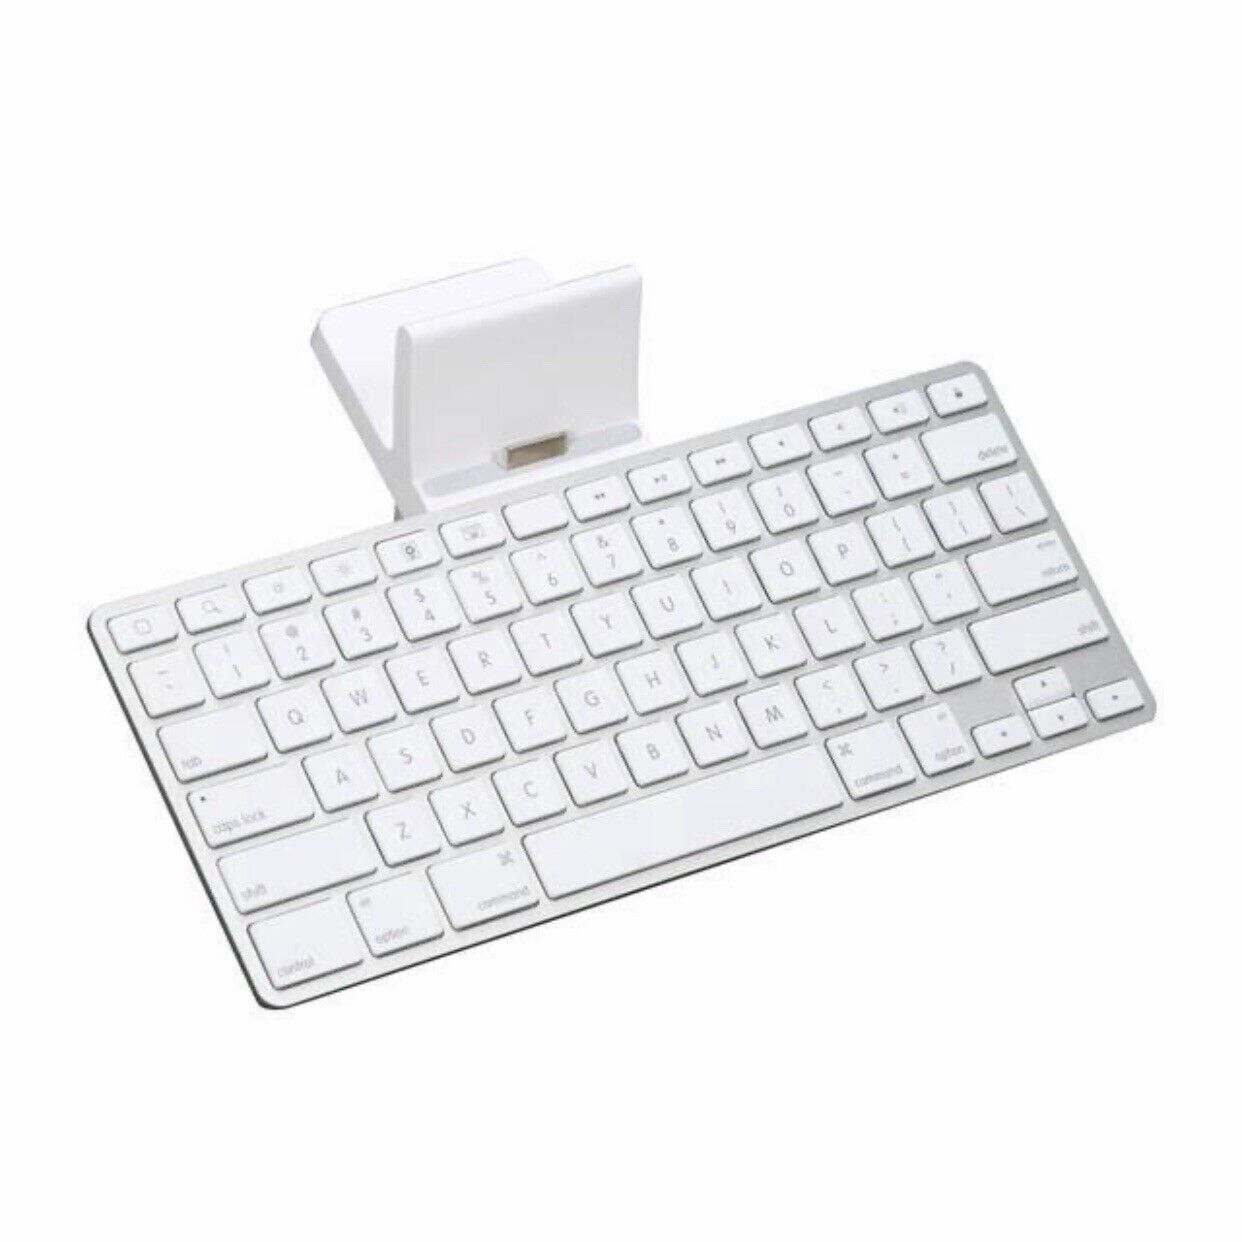 Apple Keyboard Dock for iPad 1st, 2nd, 3rd Generation 30 Pin Connecter (A1359)